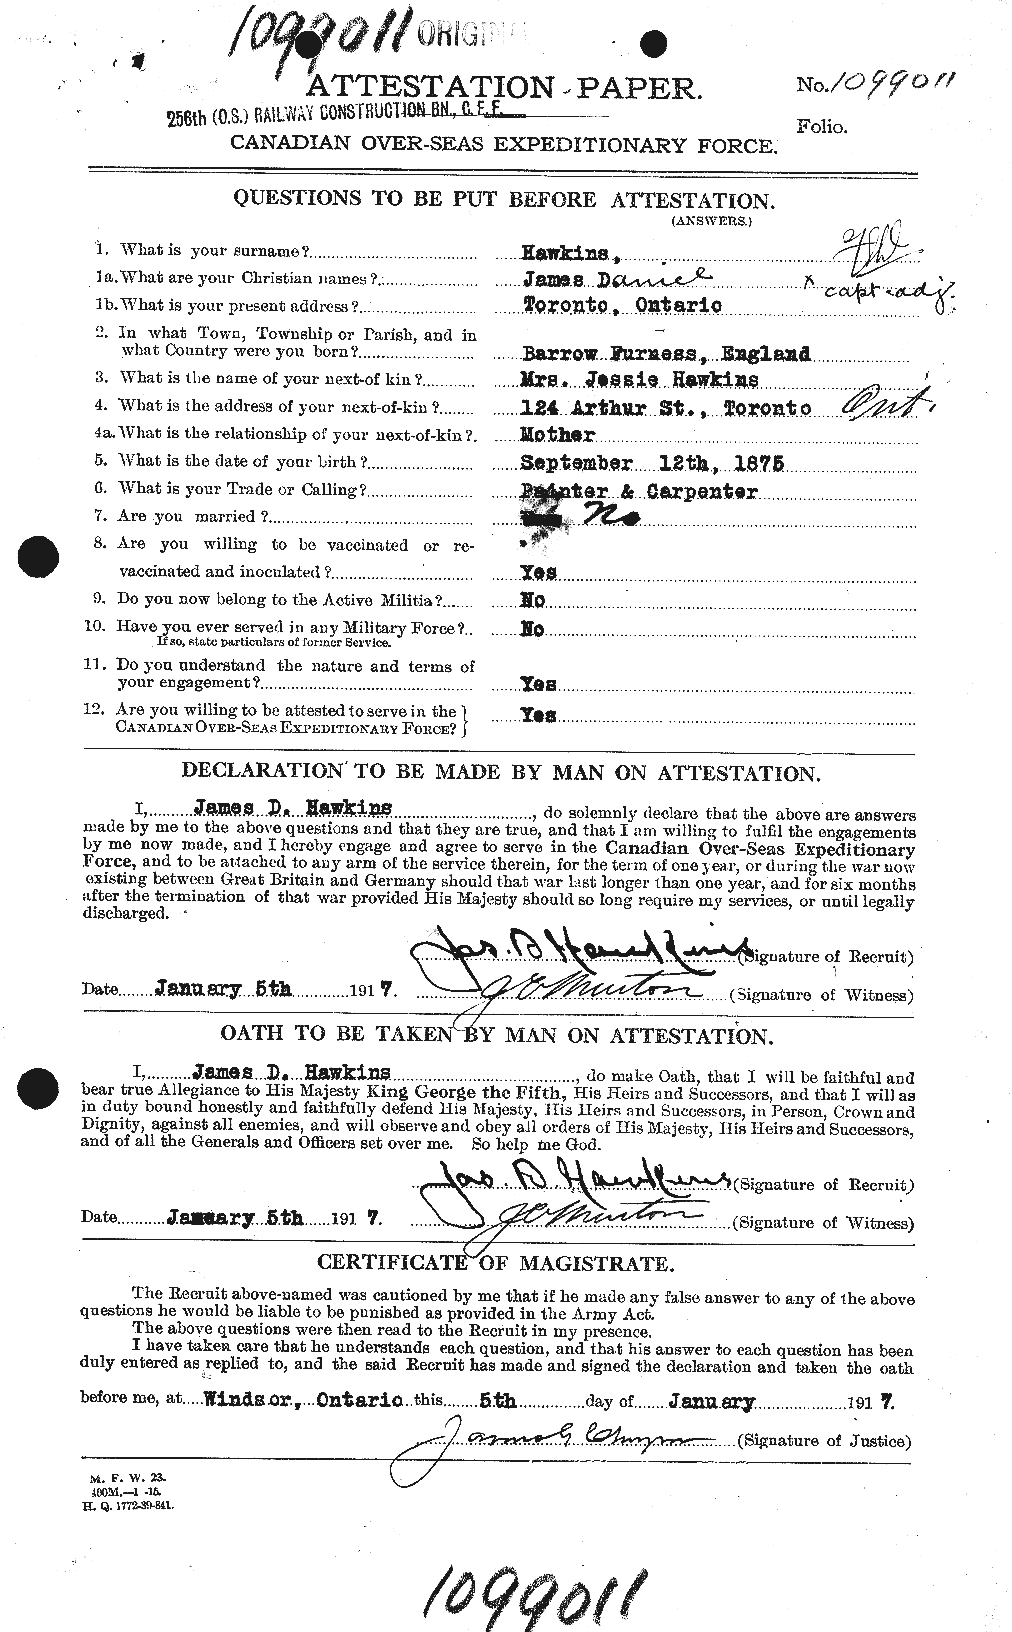 Personnel Records of the First World War - CEF 387171a